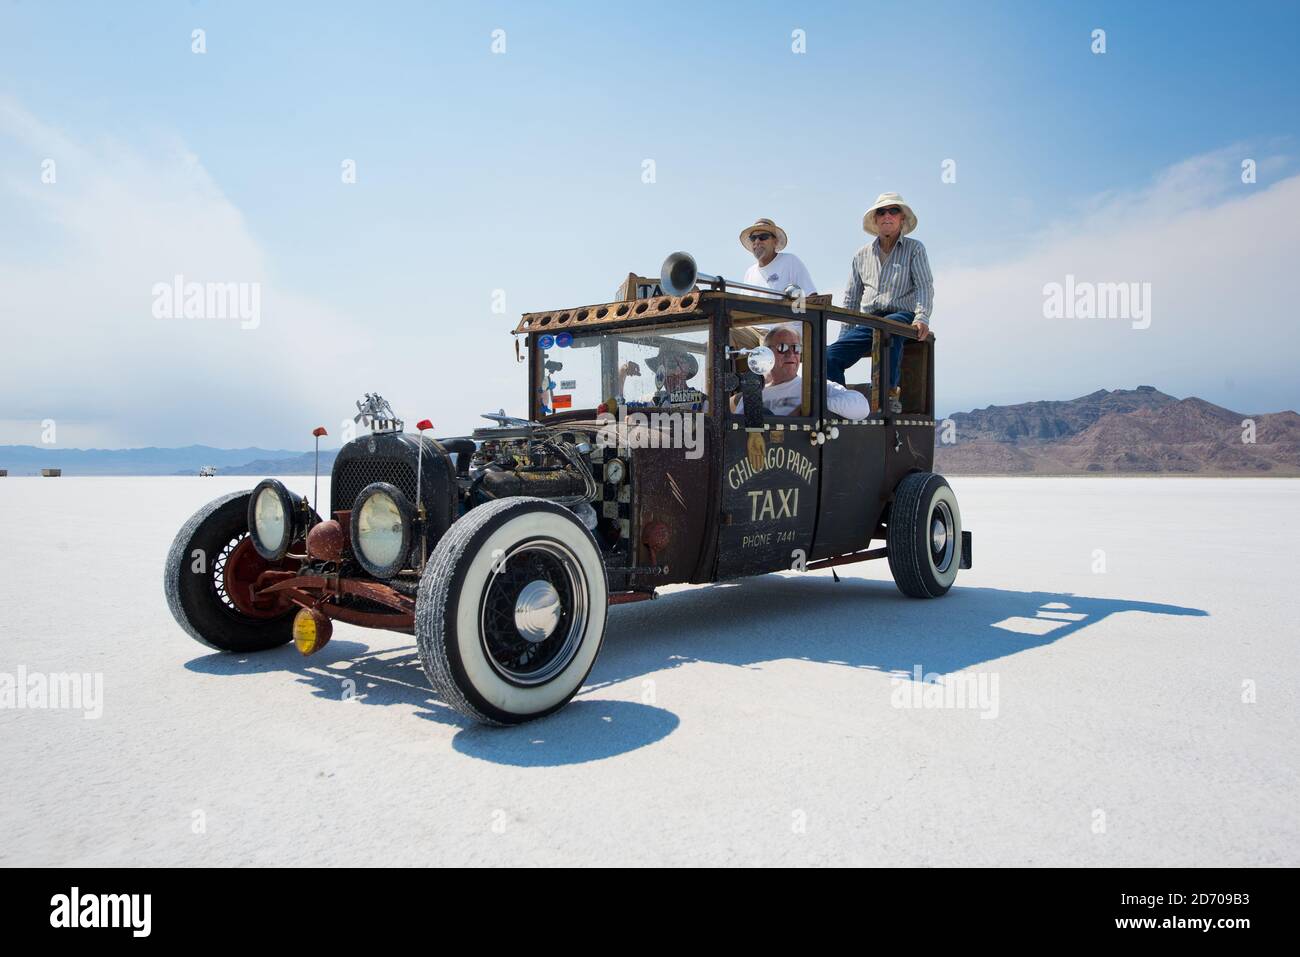 Spectators watch the action during Bonneville Speed Week, held on the Bonneville Salt Flats in Utah, USA. The annual event sees hundreds of car builders and drivers gather on the salt flats to try and break land speed records in various different categories of vehicle. Stock Photo